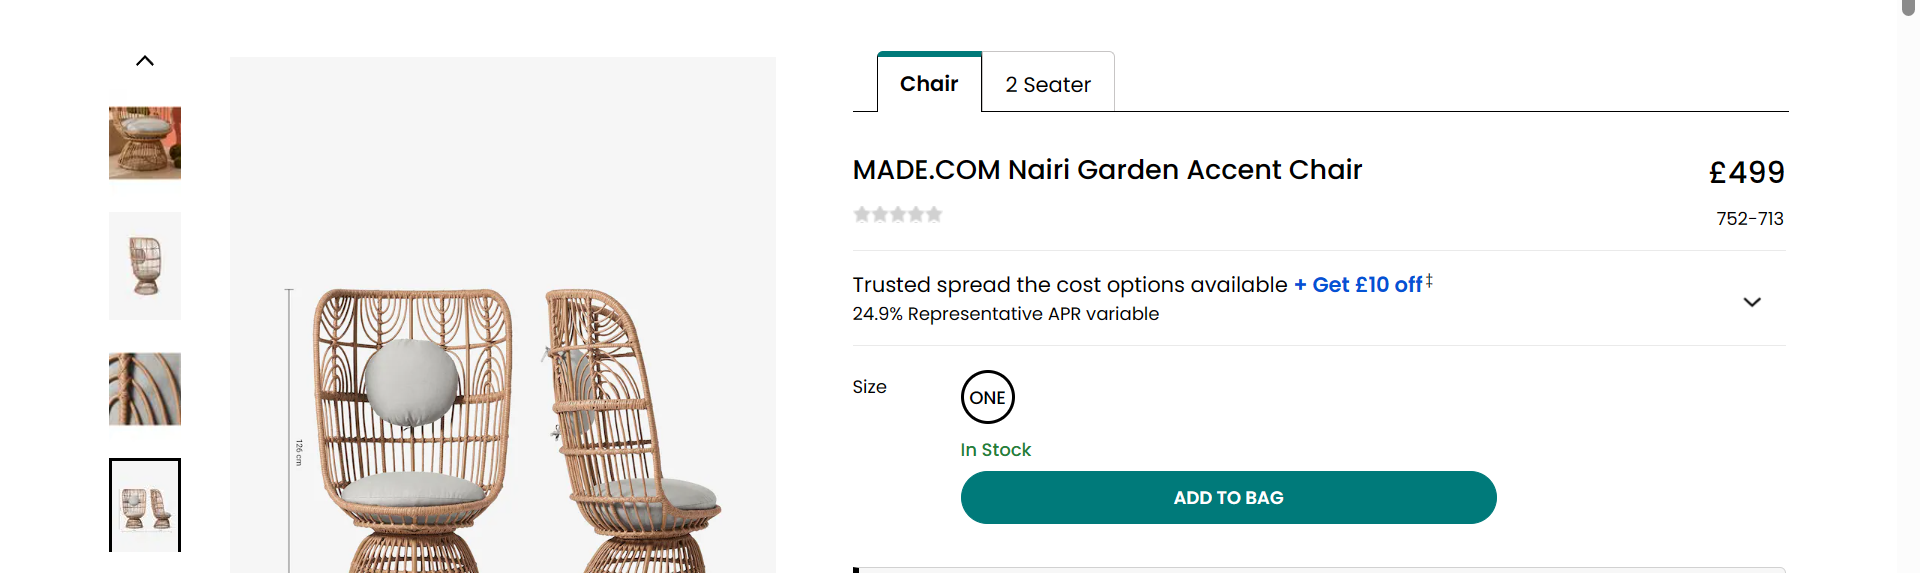 Brand New & Boxed MADE.COM Nairi Garden Accent Chair. RRP £499.00. Made from decorative natural - Image 7 of 7